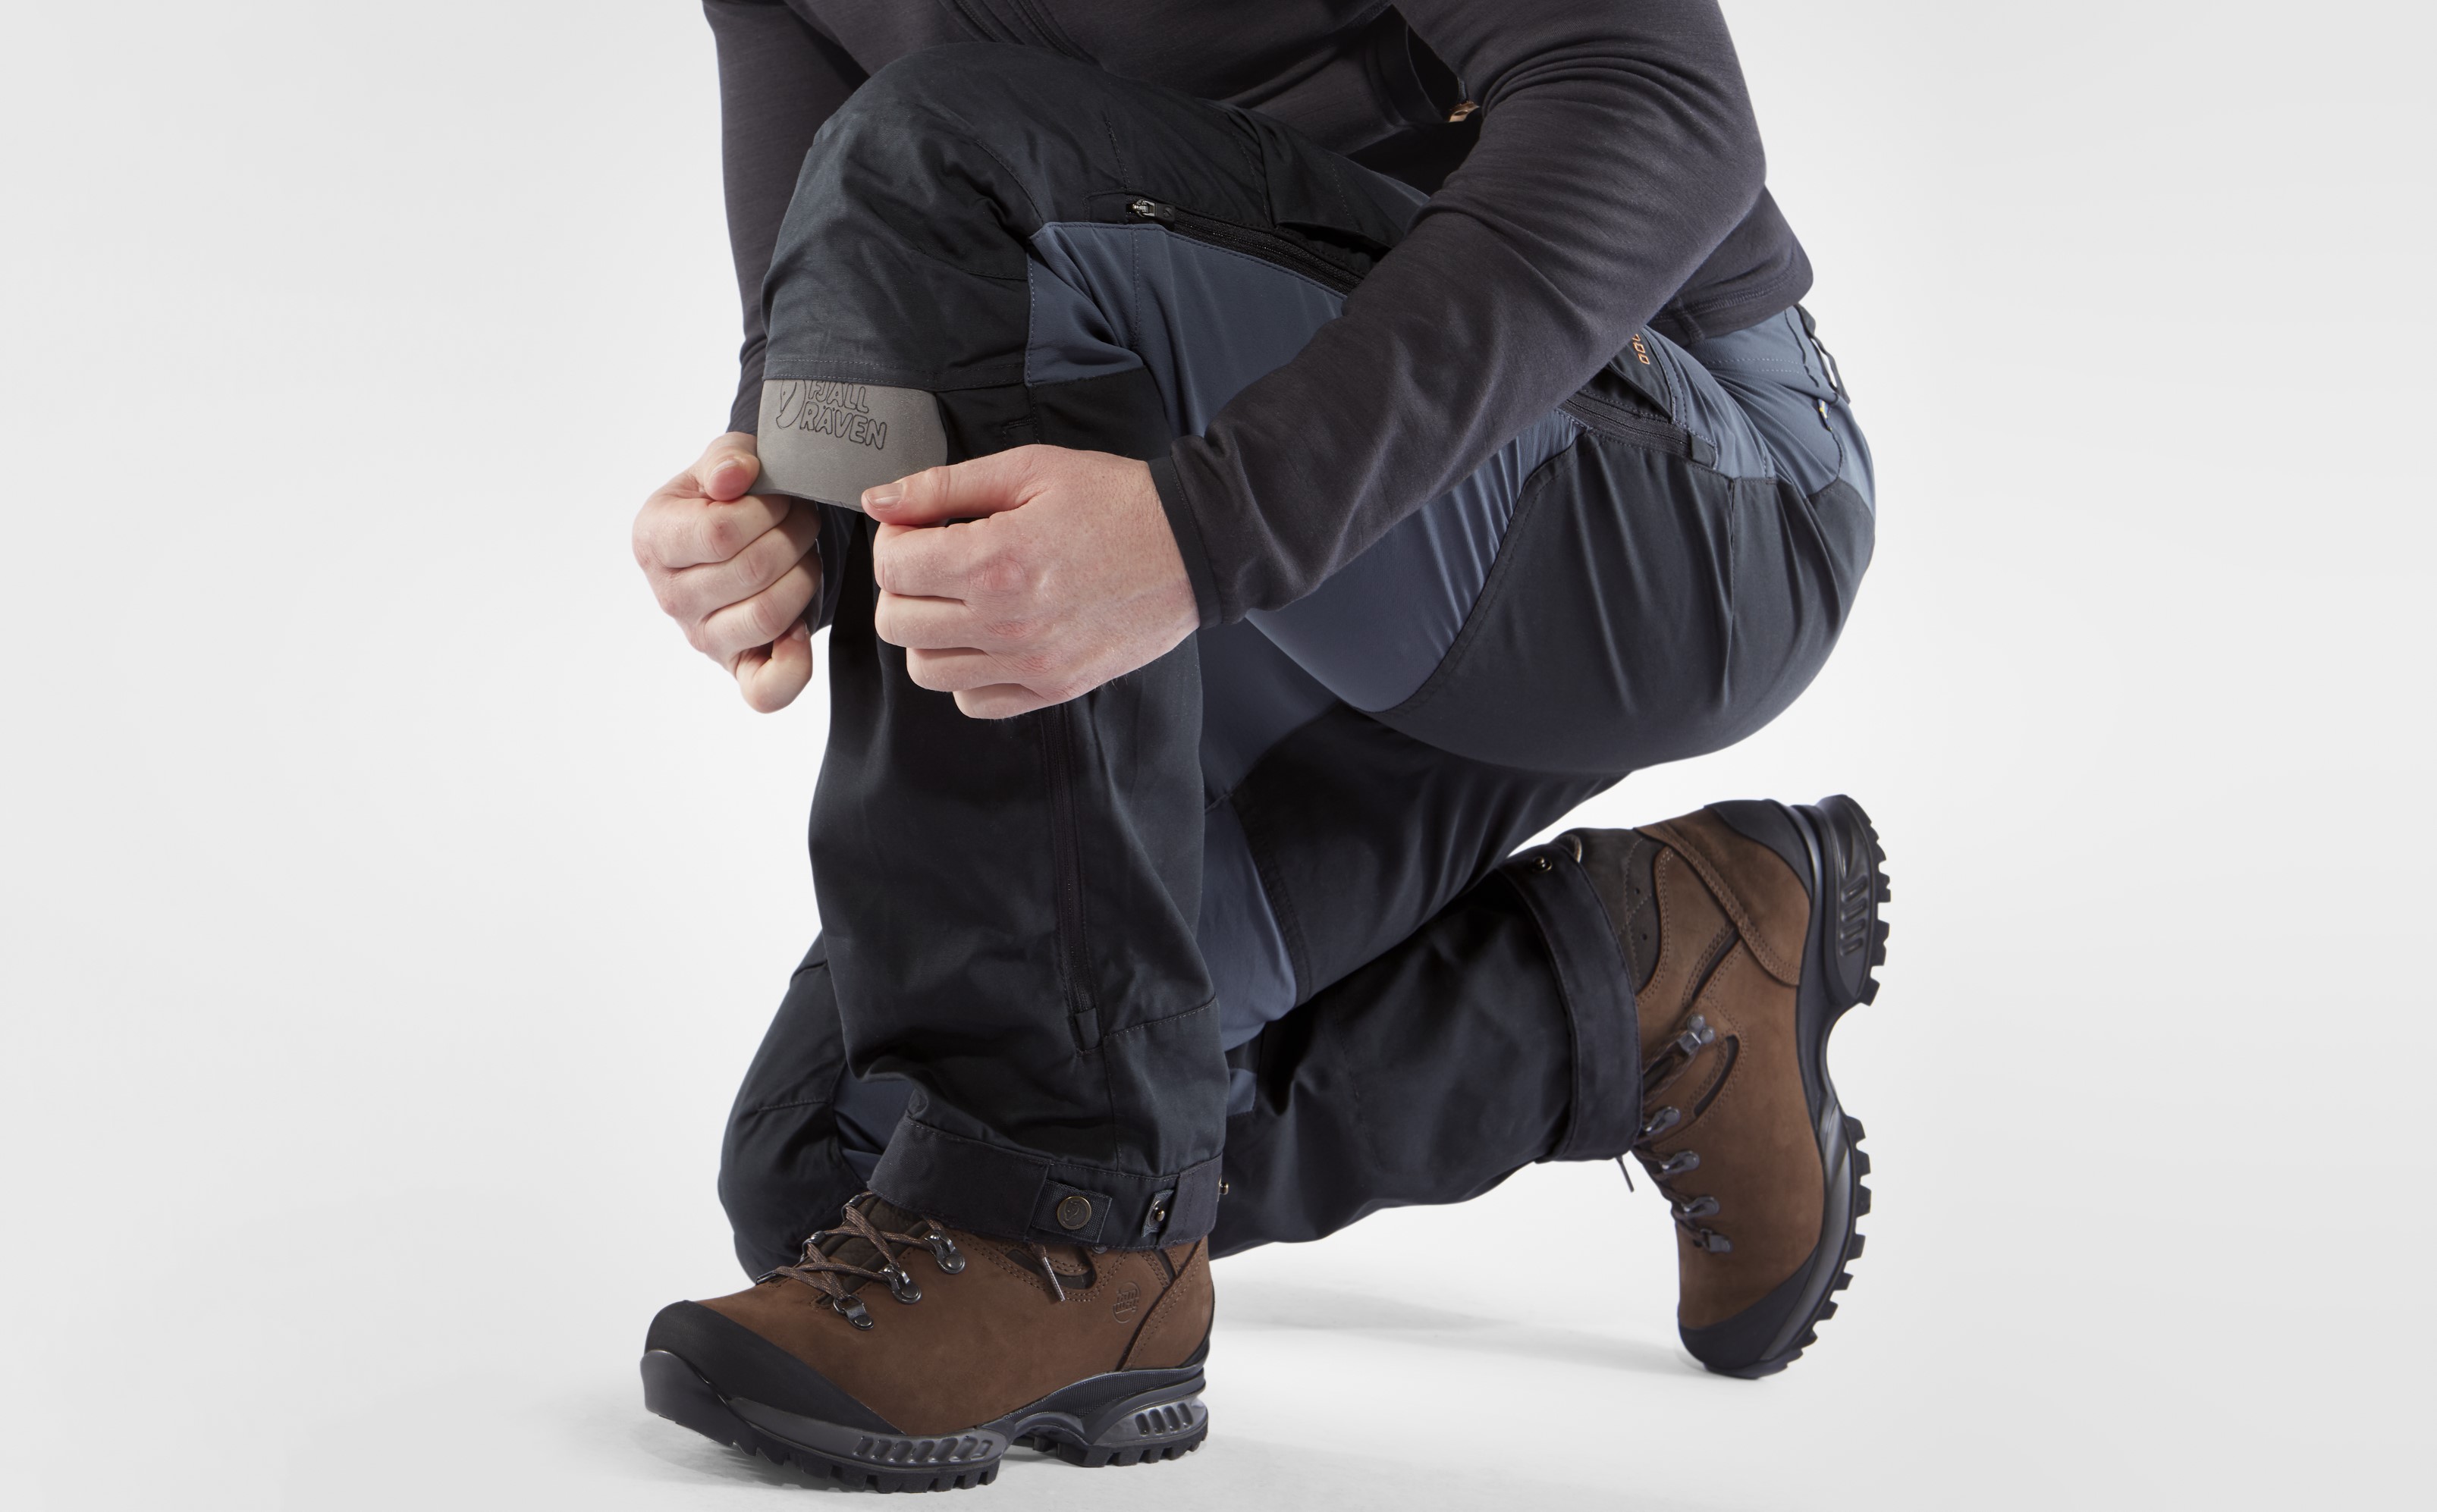 Fjallraven Keb walking trousers review: the ultimate rugged hiking trouser